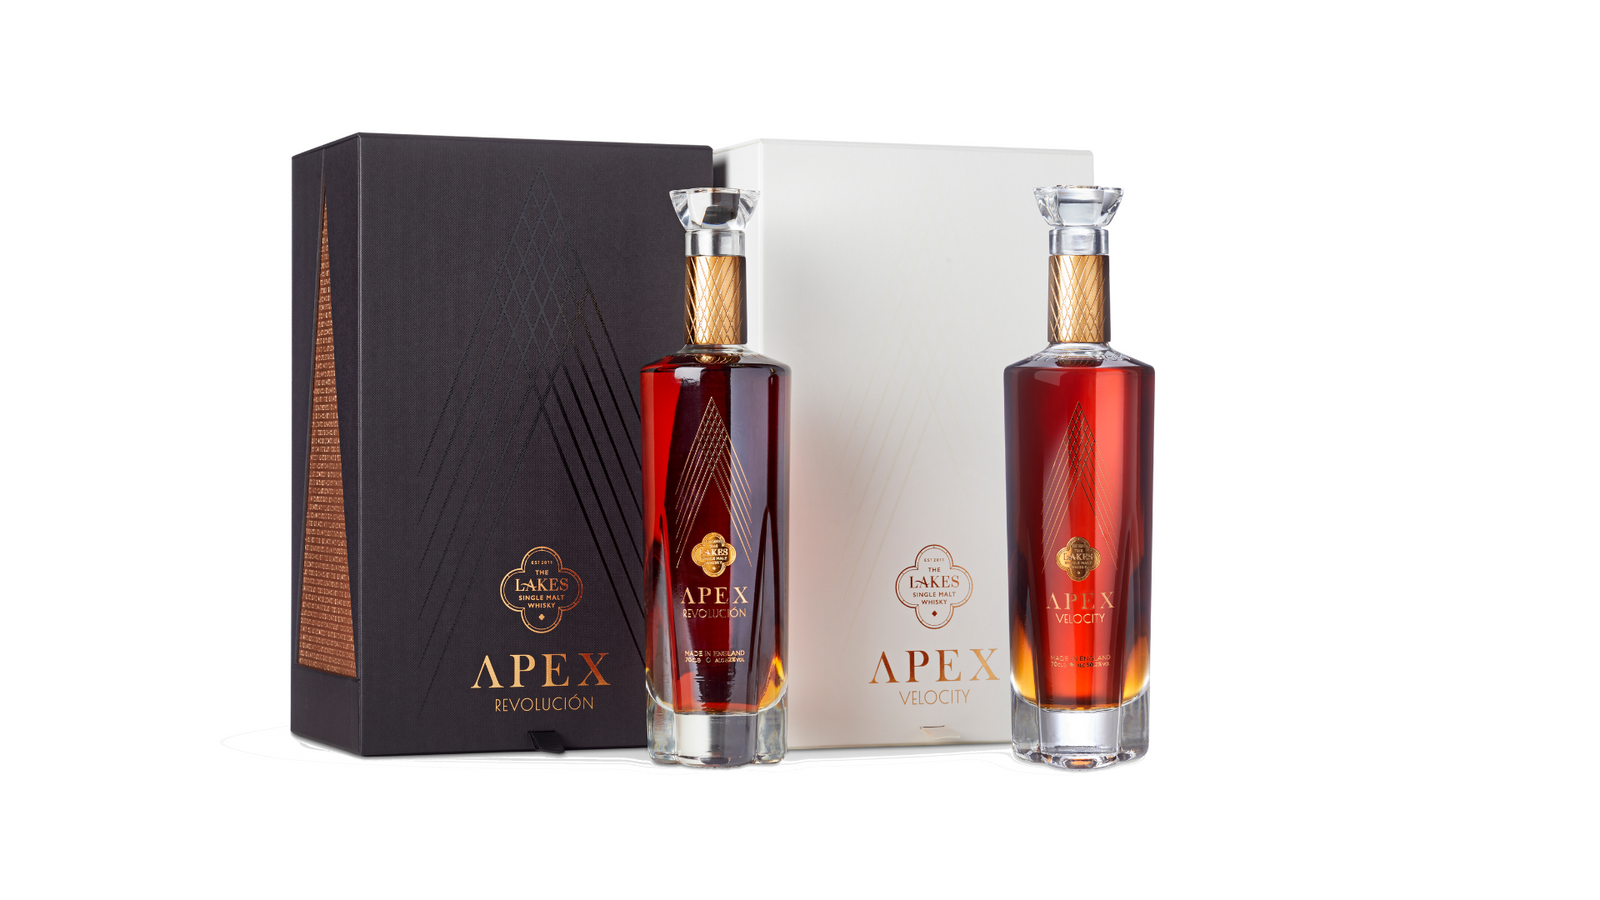 The Apex Collection; elevating whisky flavour with the art of élevage.